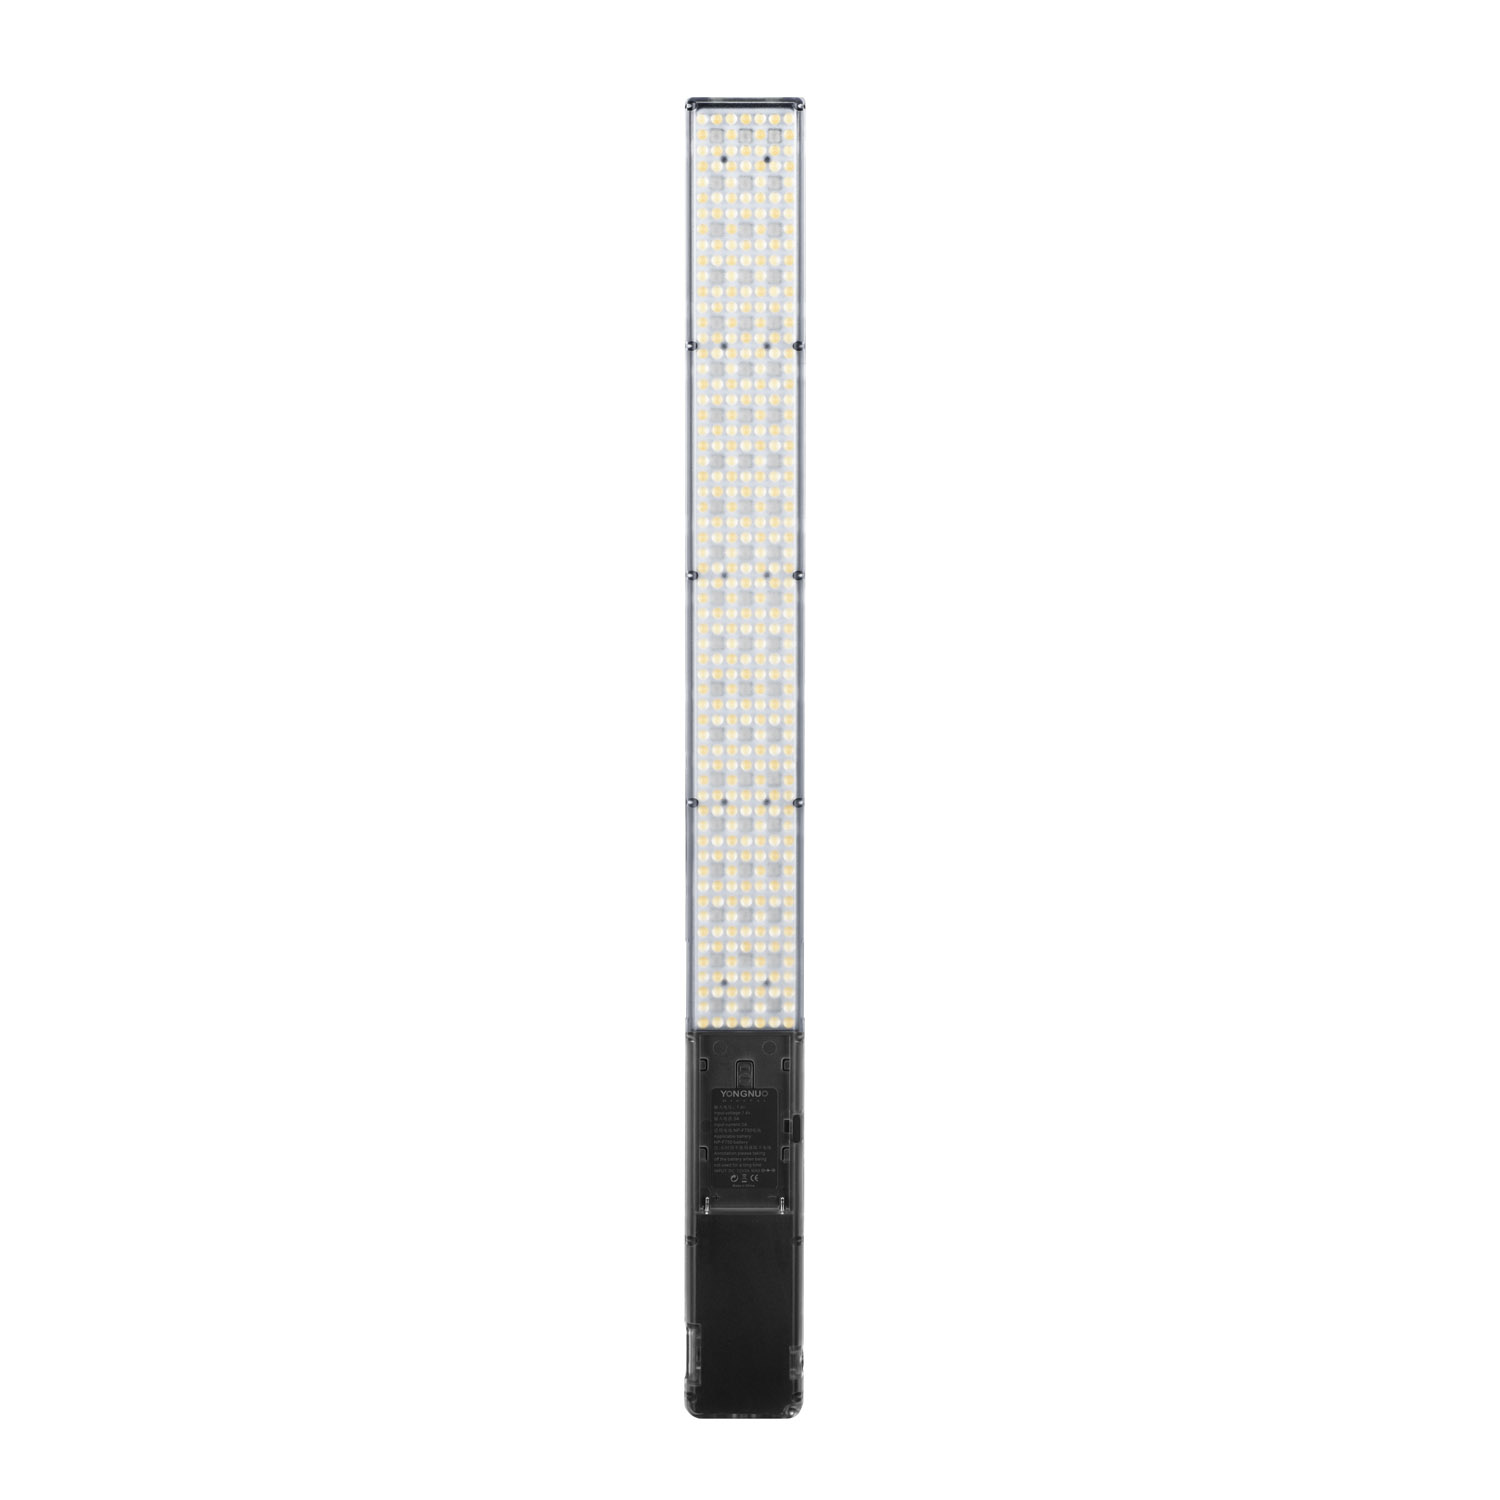 Sell Stick LED Light with RGB full color, YN360III PRO